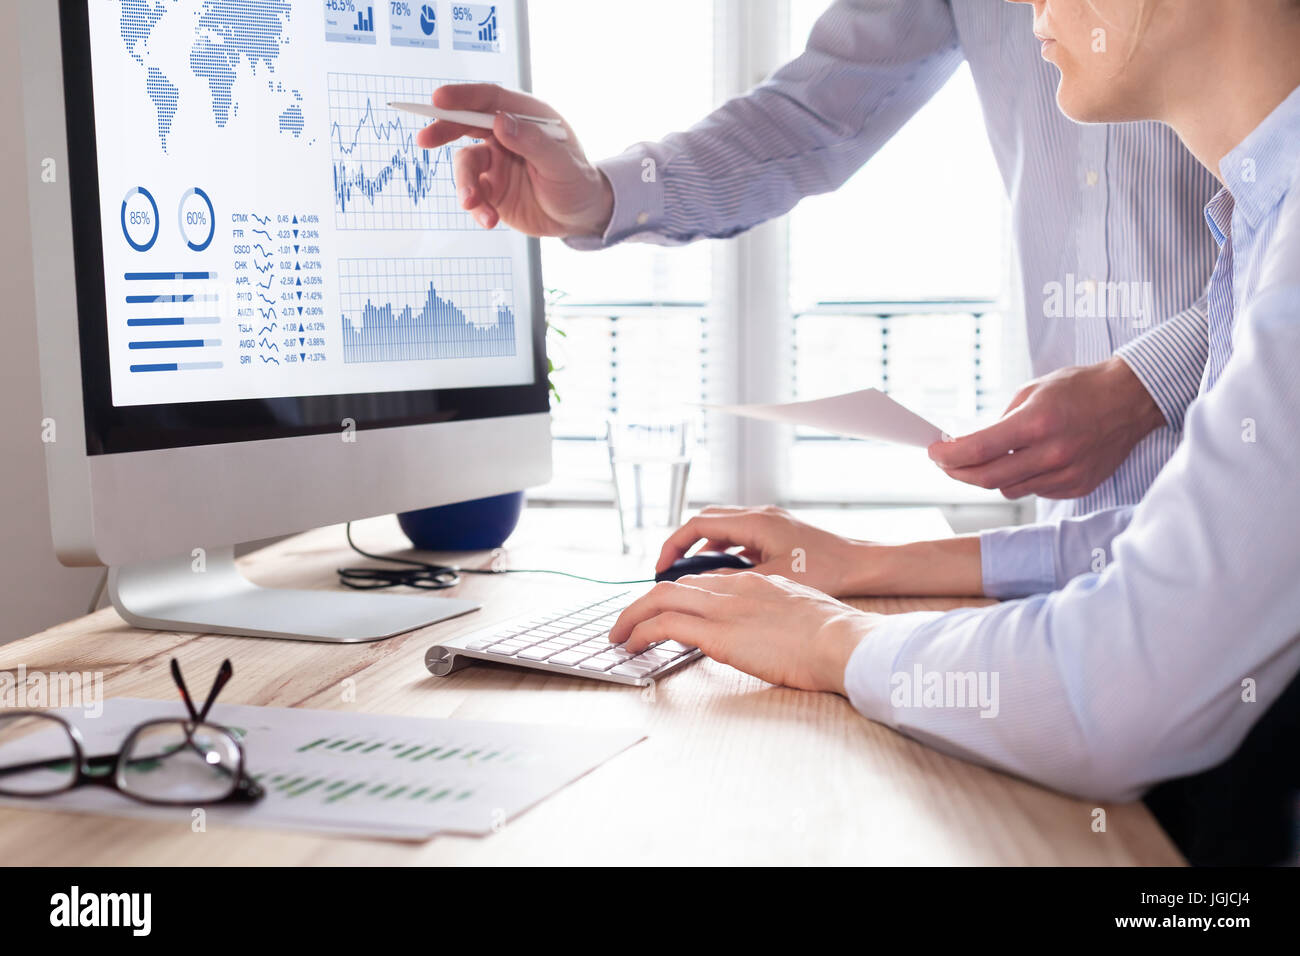 Two people analyzing stock market investment strategy with key performance indicator on financial dashboard and business intelligence on computer Stock Photo